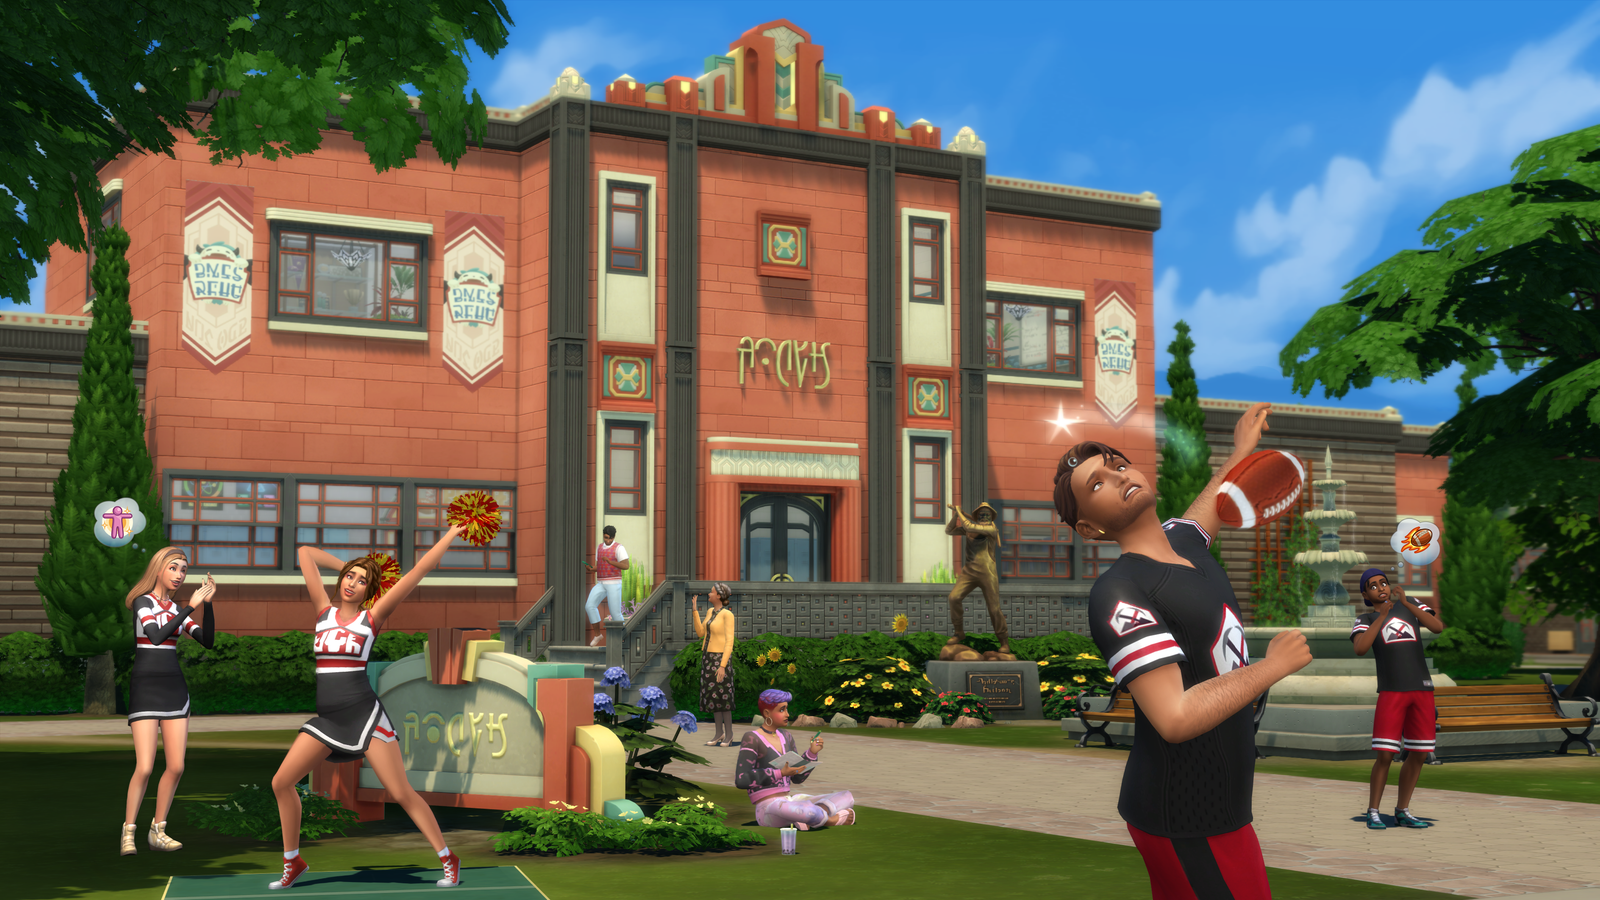 The Sims 4 is Completely Free for a Limited Time Only